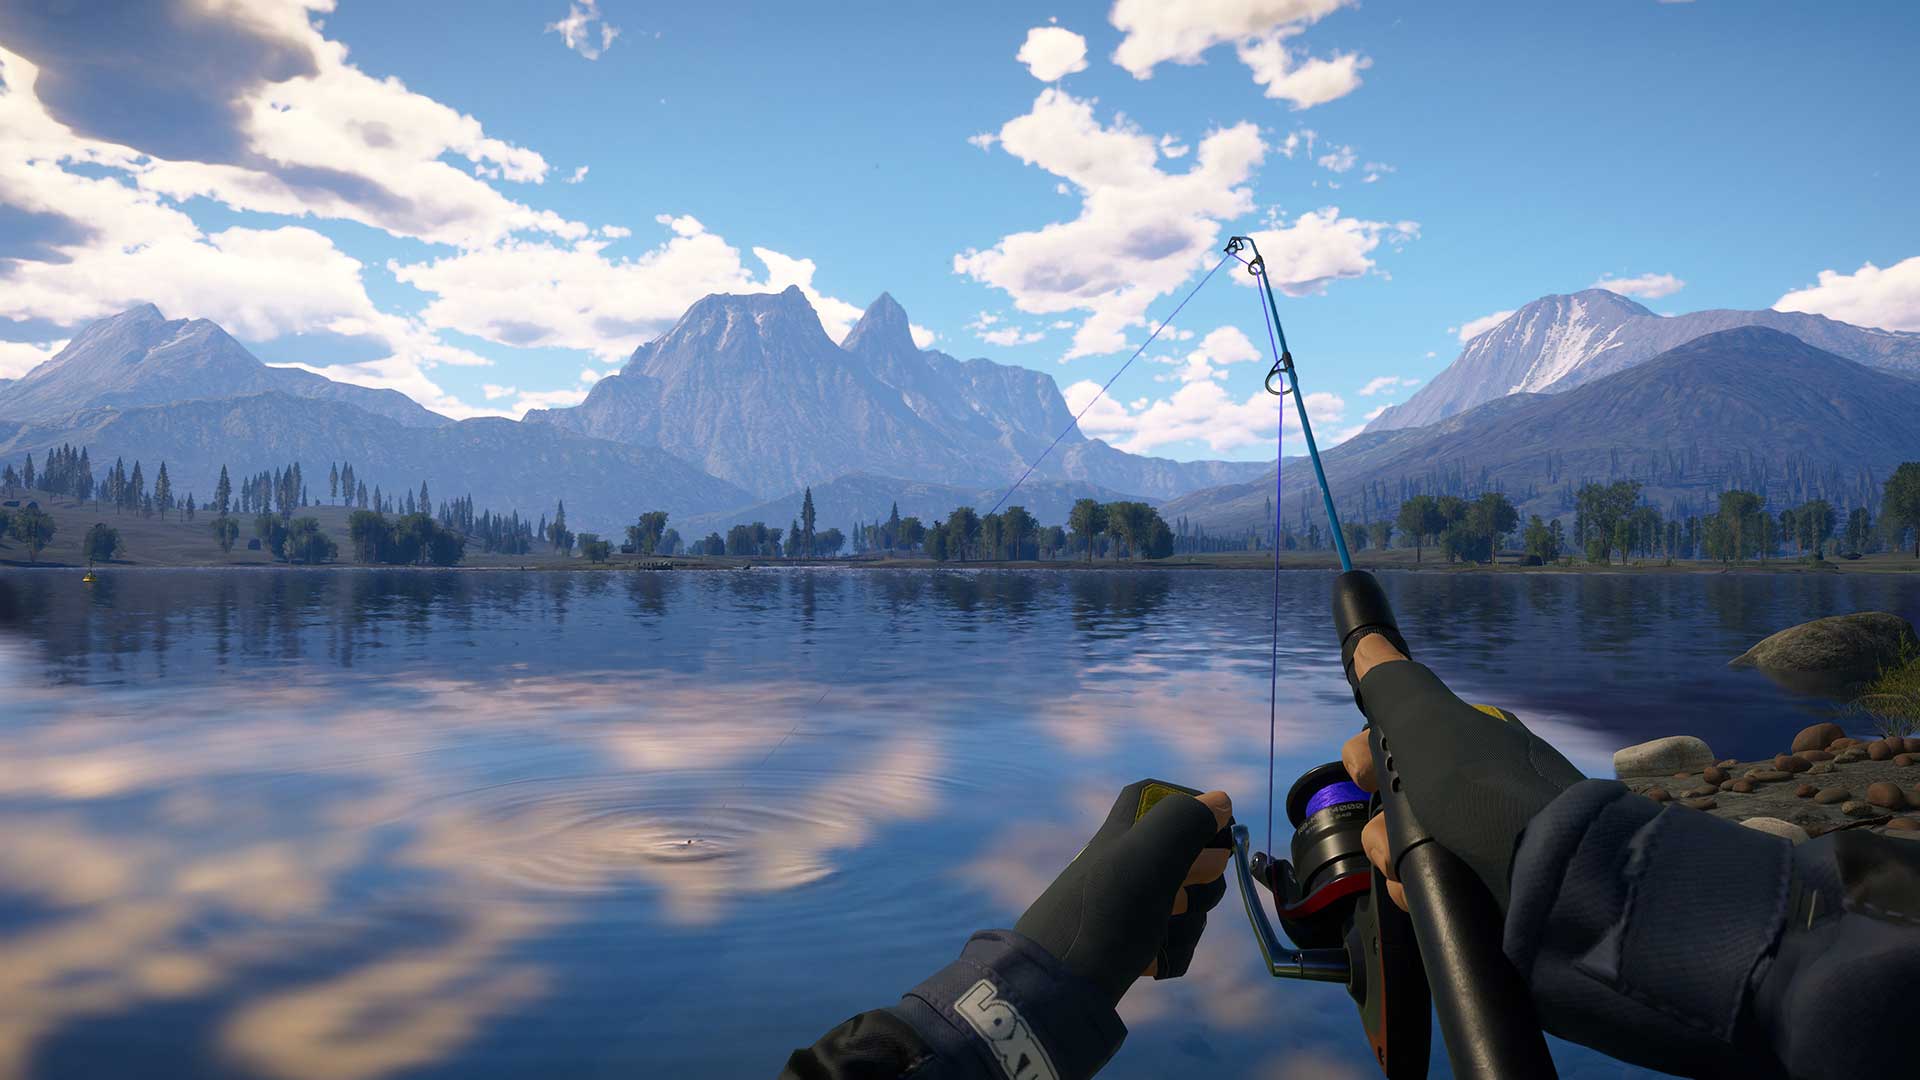 Call of the Wild: The Angler lets you fish with friends in an open world